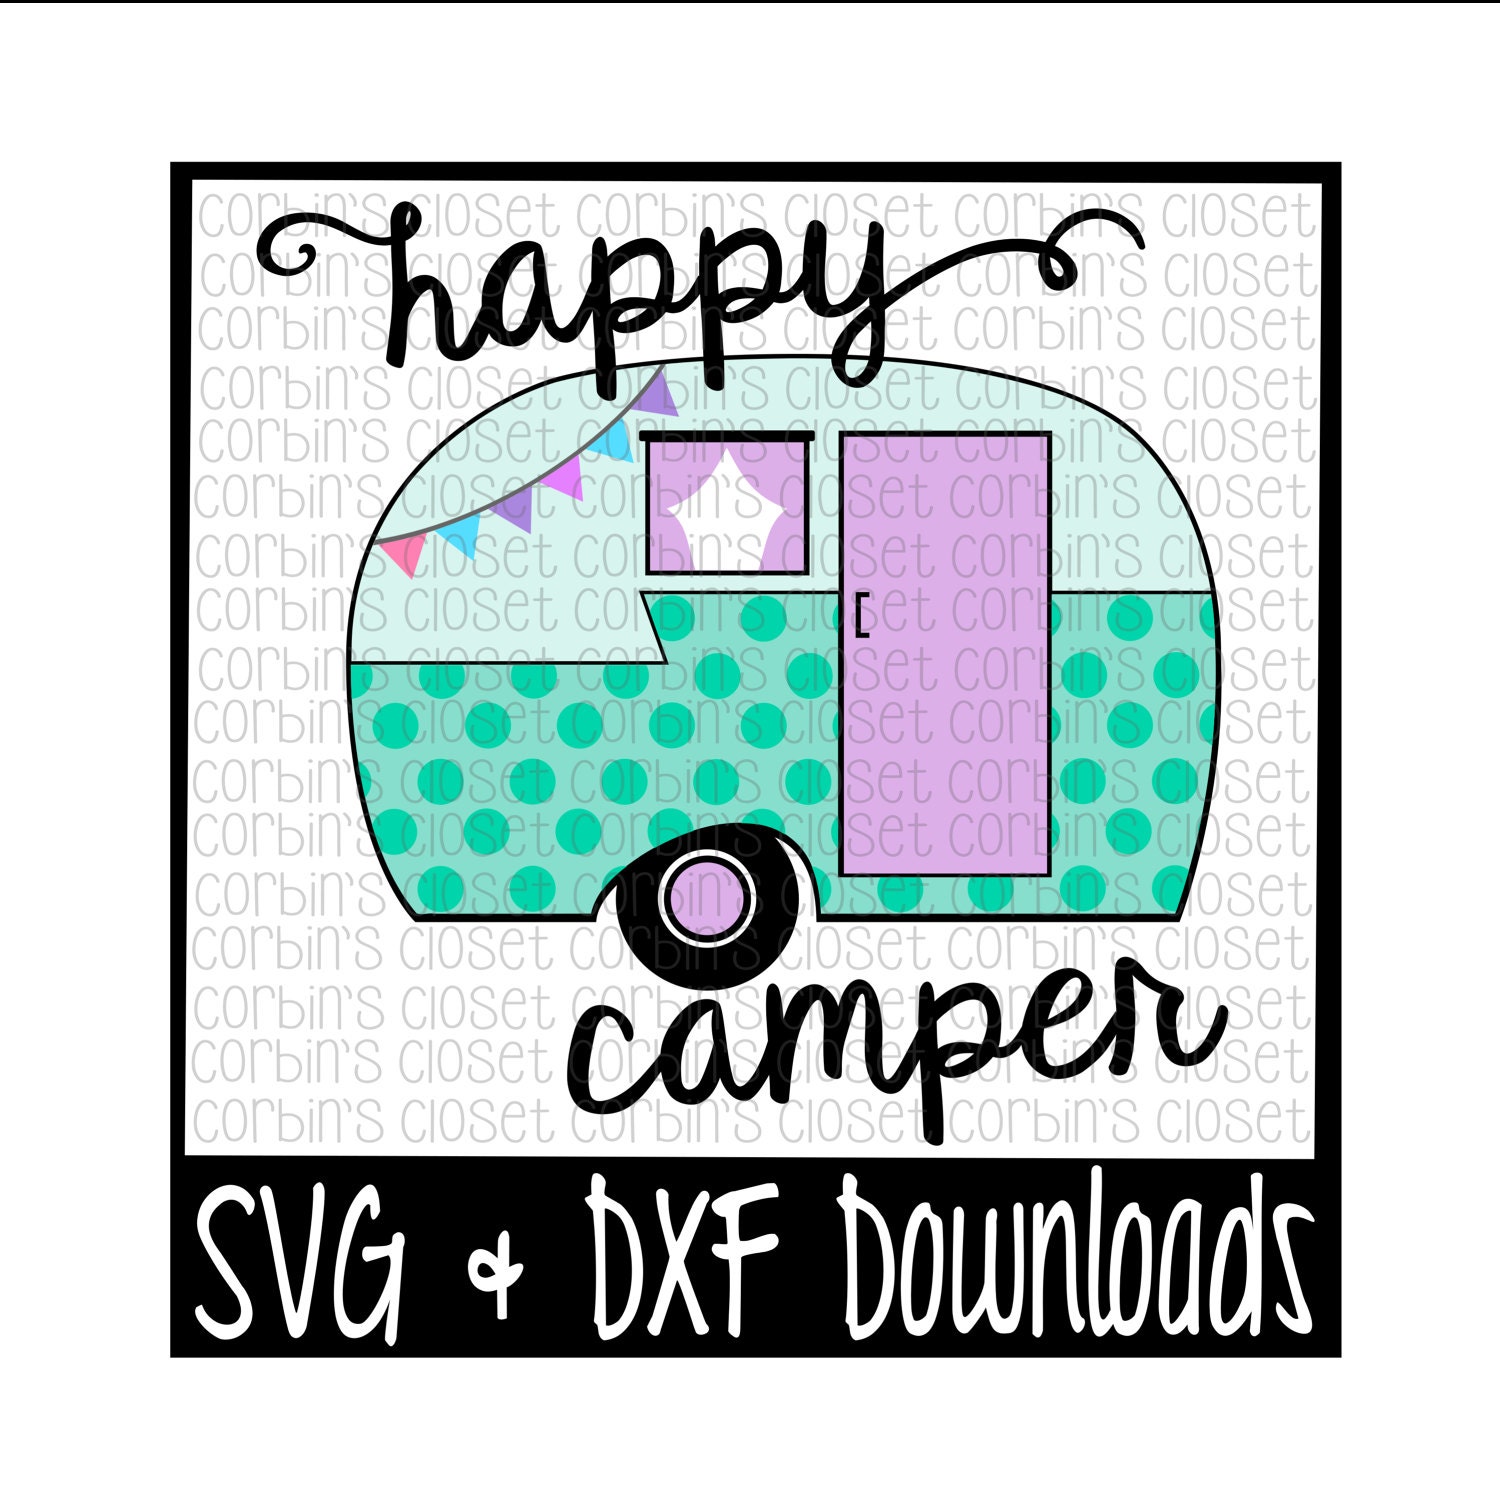 Download Camper SVG Cut File DXF & SVG Files Silhouette Cameo